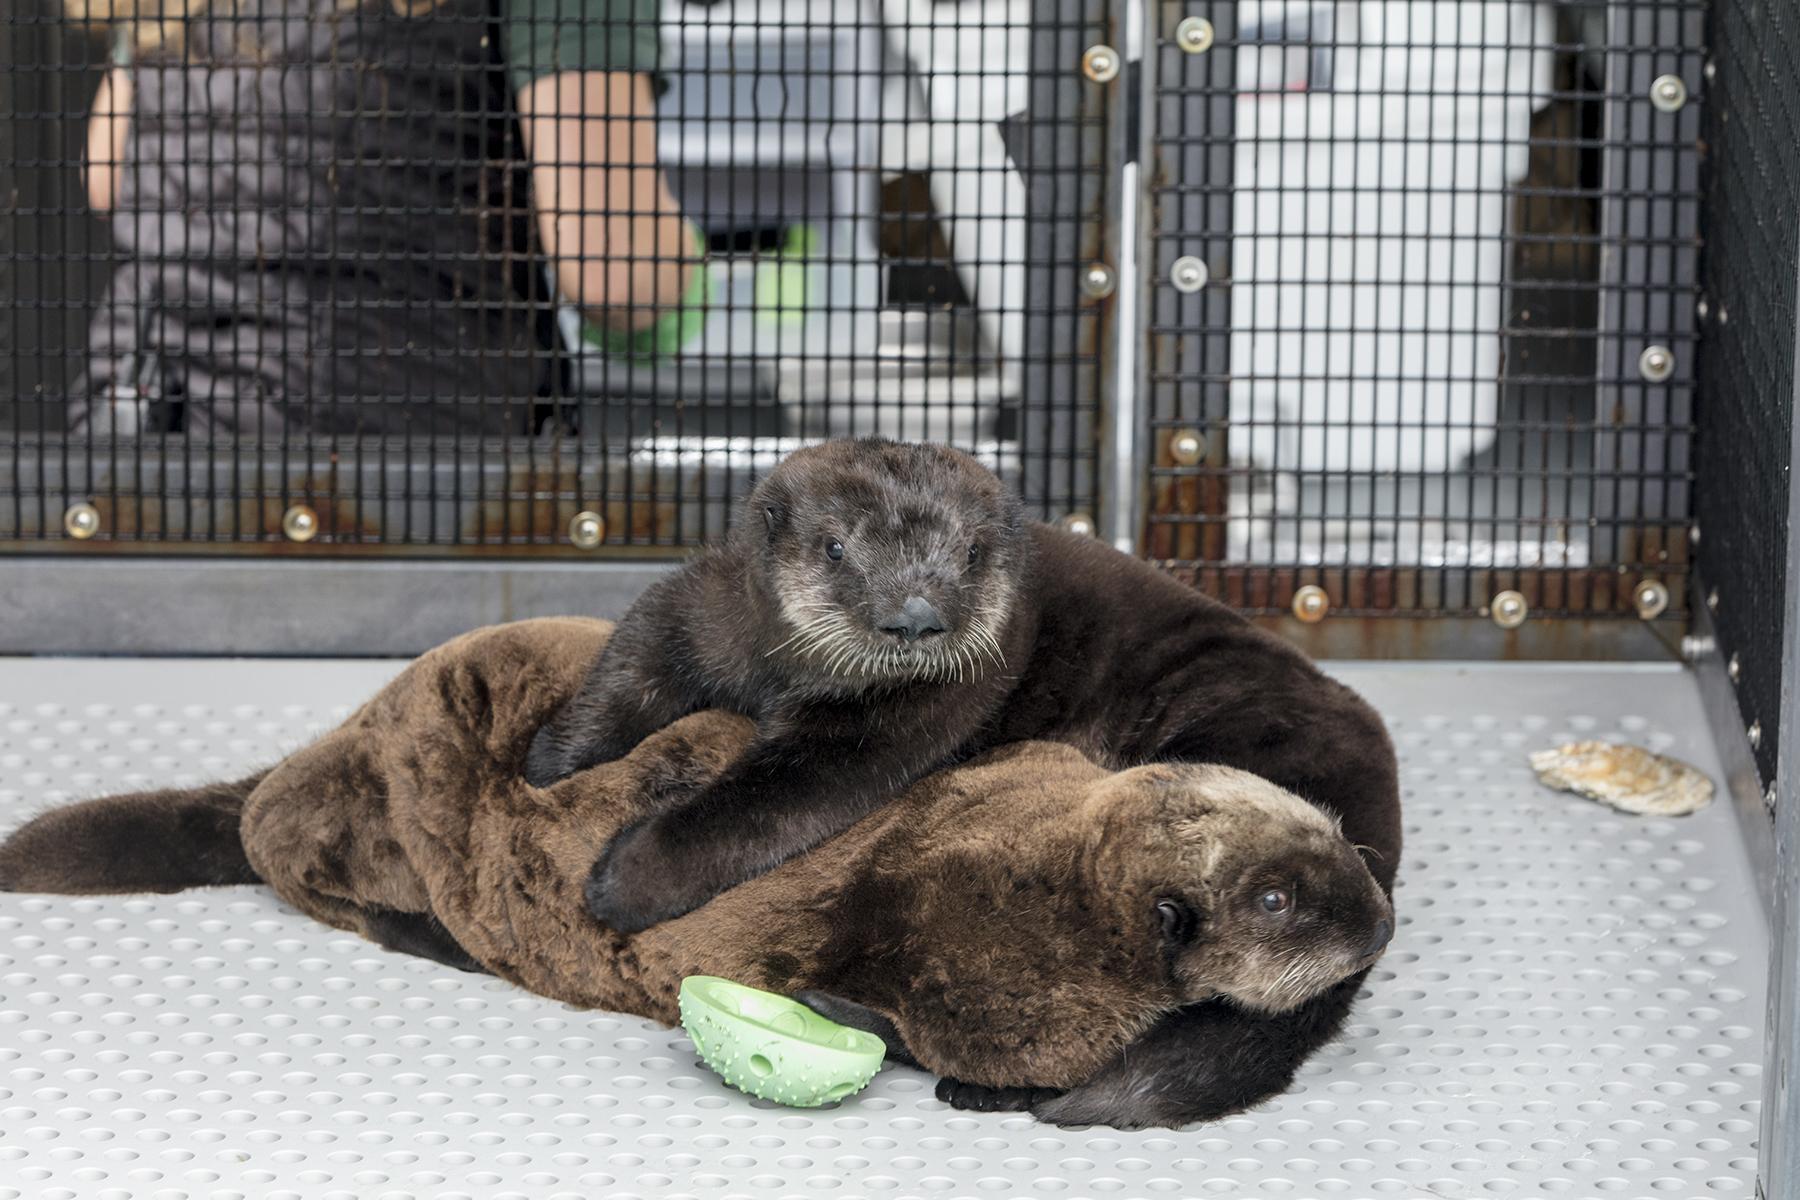 The newly arrived sea otter pups were deemed non-releasable by the U.S. Fish and Wildlife Service. (Brenna Hernandez / Shedd Aquarium) 